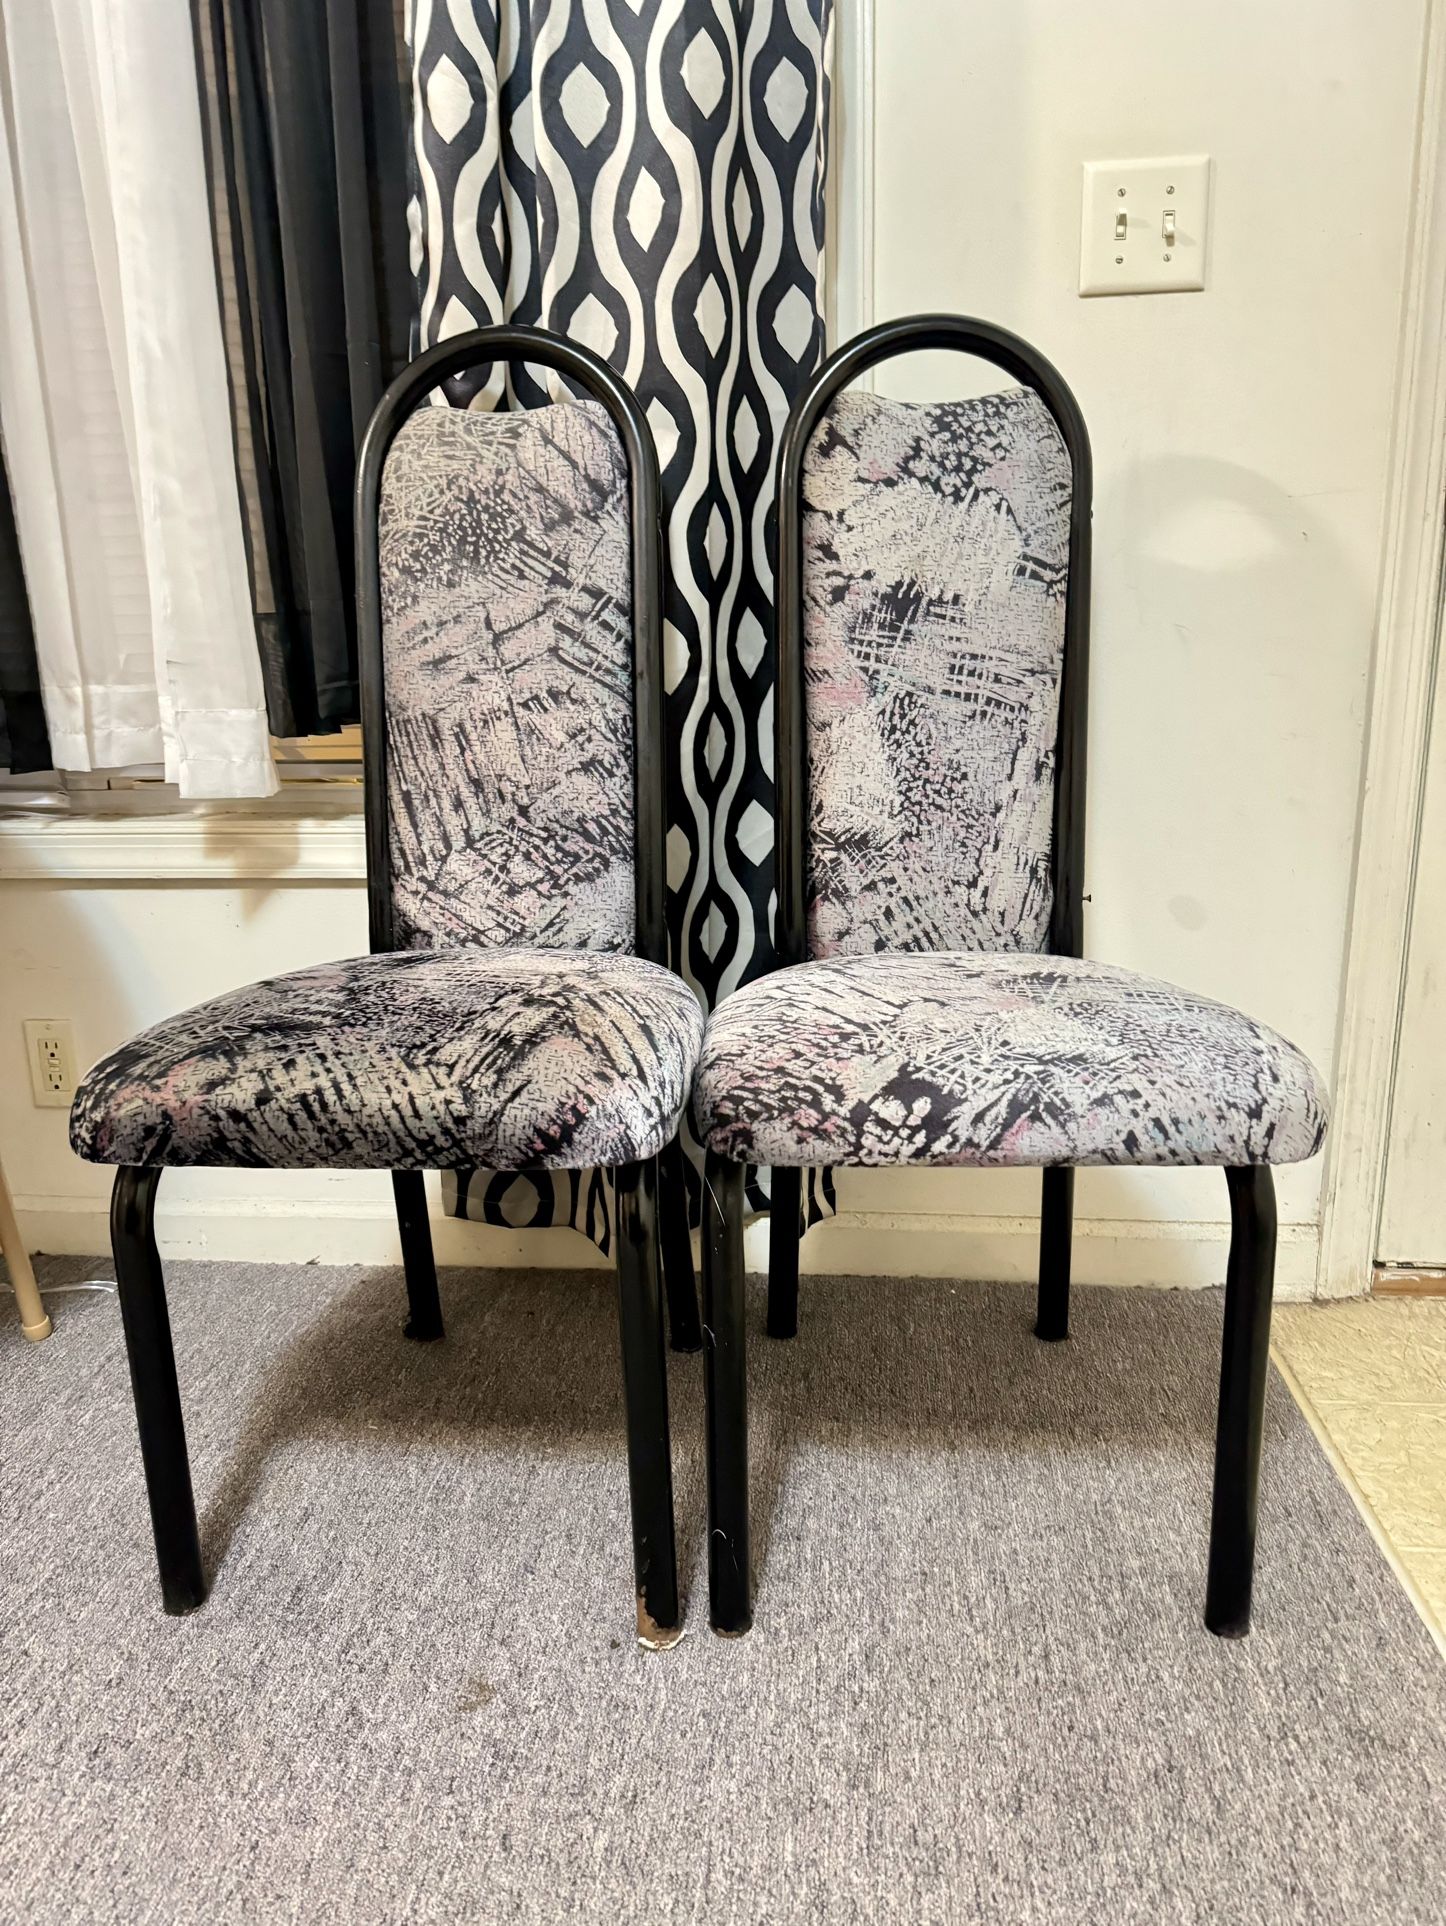 Two Chairs -$30 For Both, $20 Each